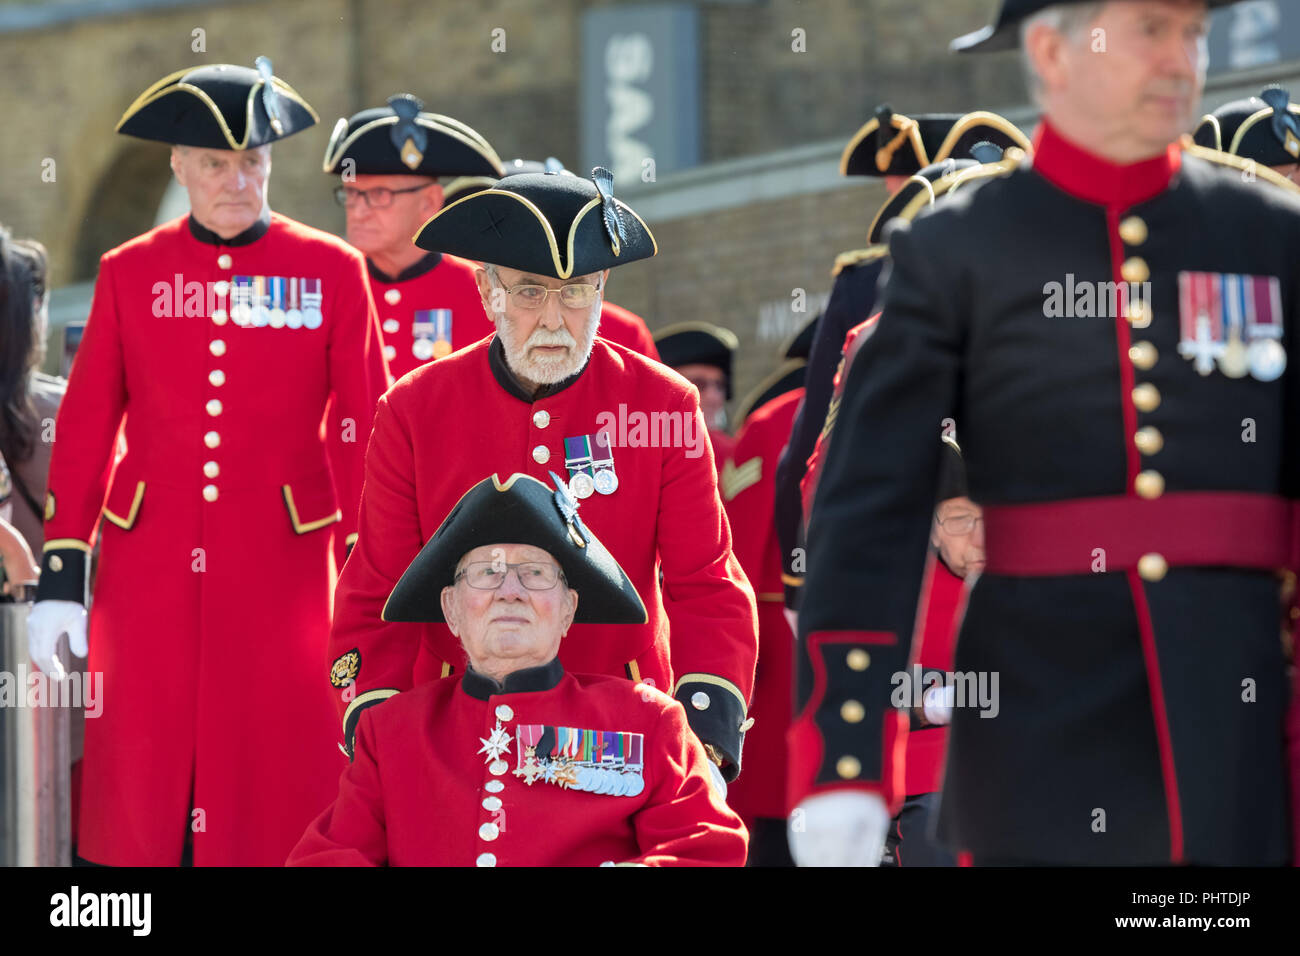 Chelsea Pensioners march on King's Road in London to commemorate the end of the First World War. Stock Photo